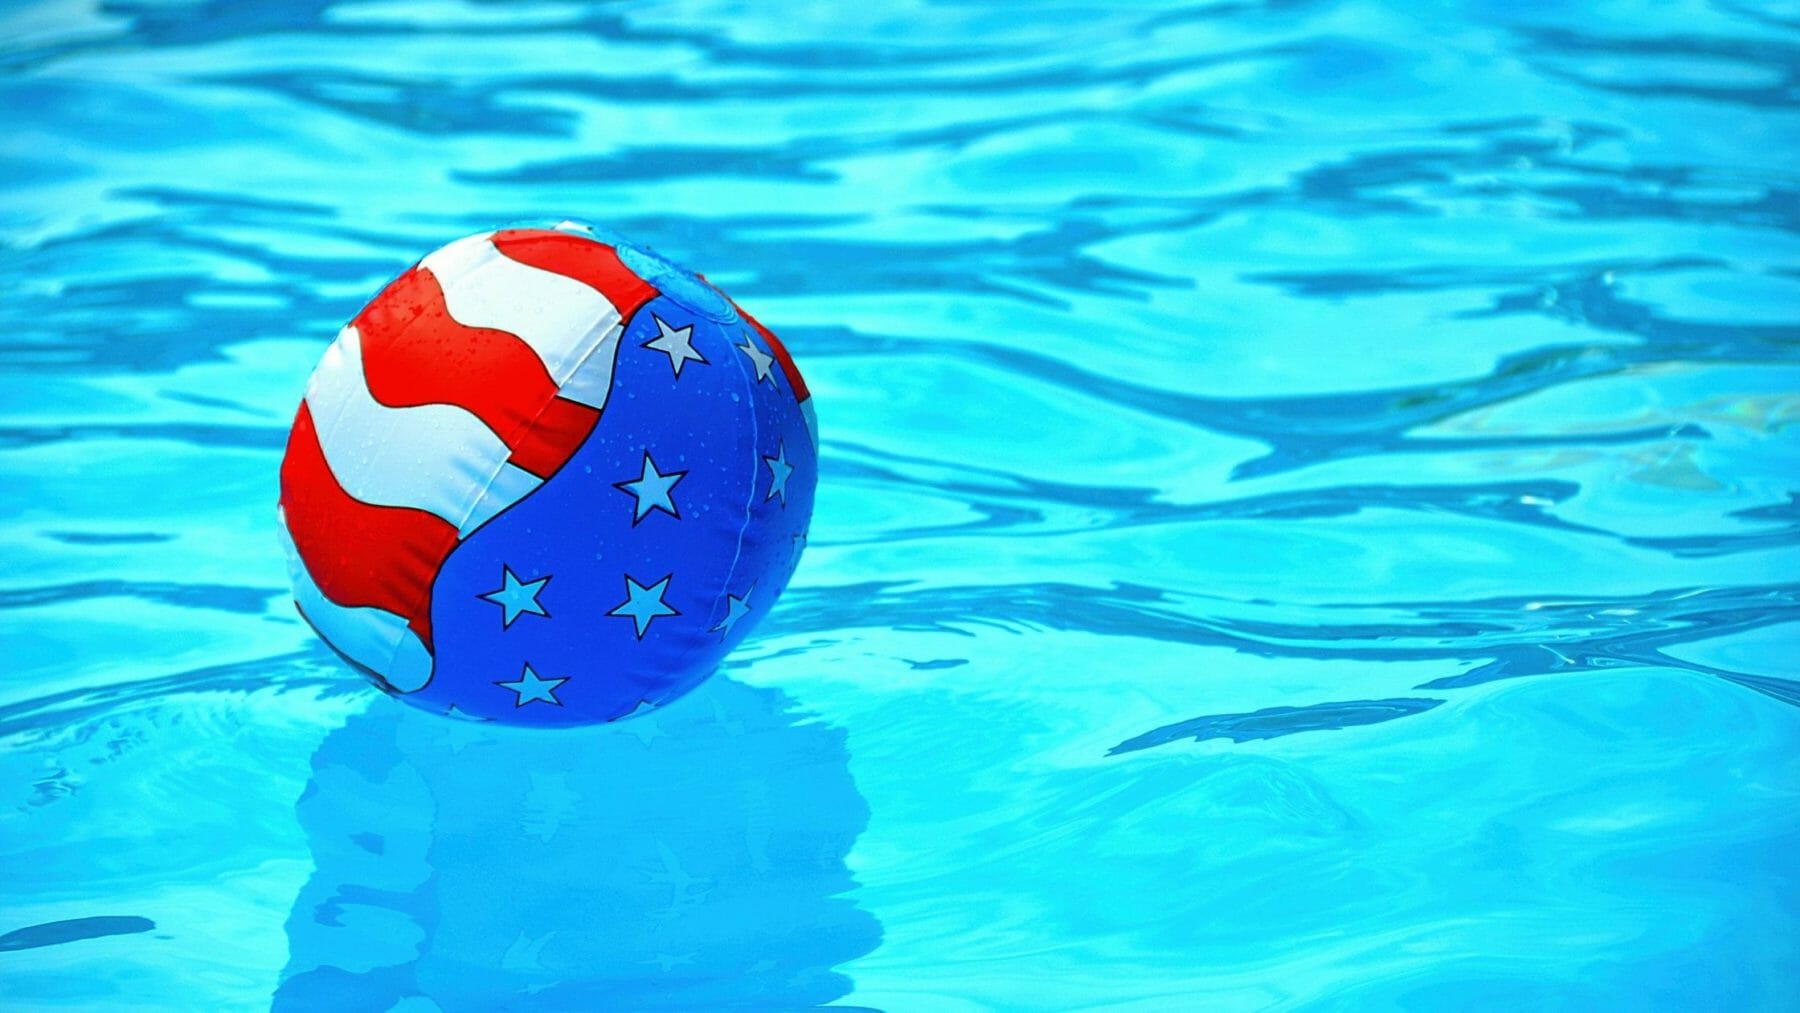 Patriotic pool party with American flag beach ball.